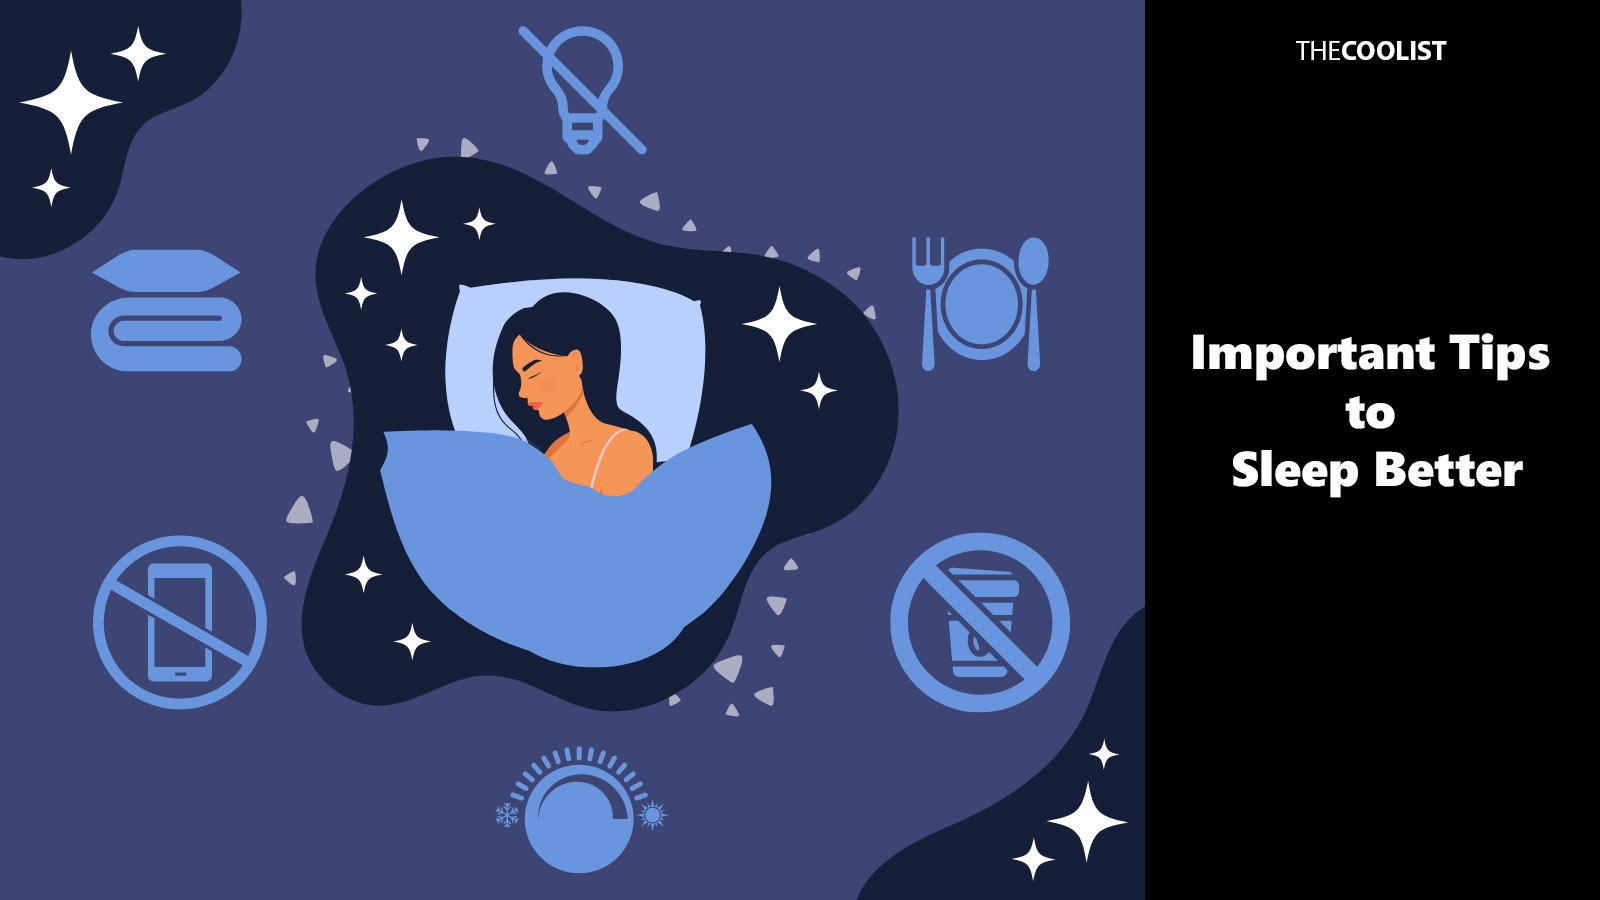 10 Important Tips to Sleep Better